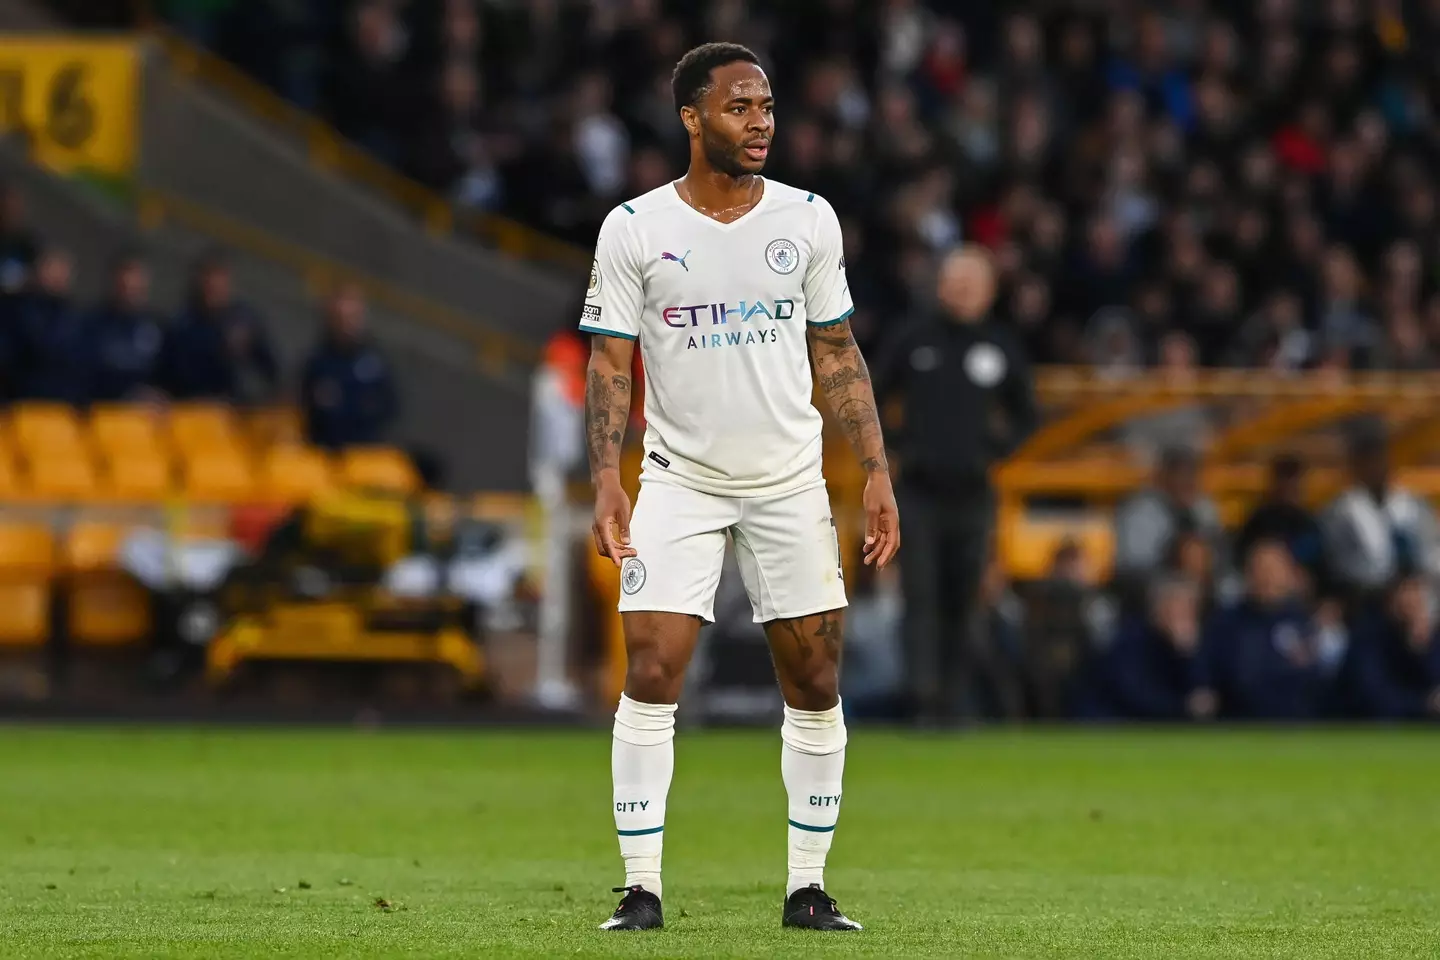 Raheem Sterling of Manchester City during the game. (Alamy)